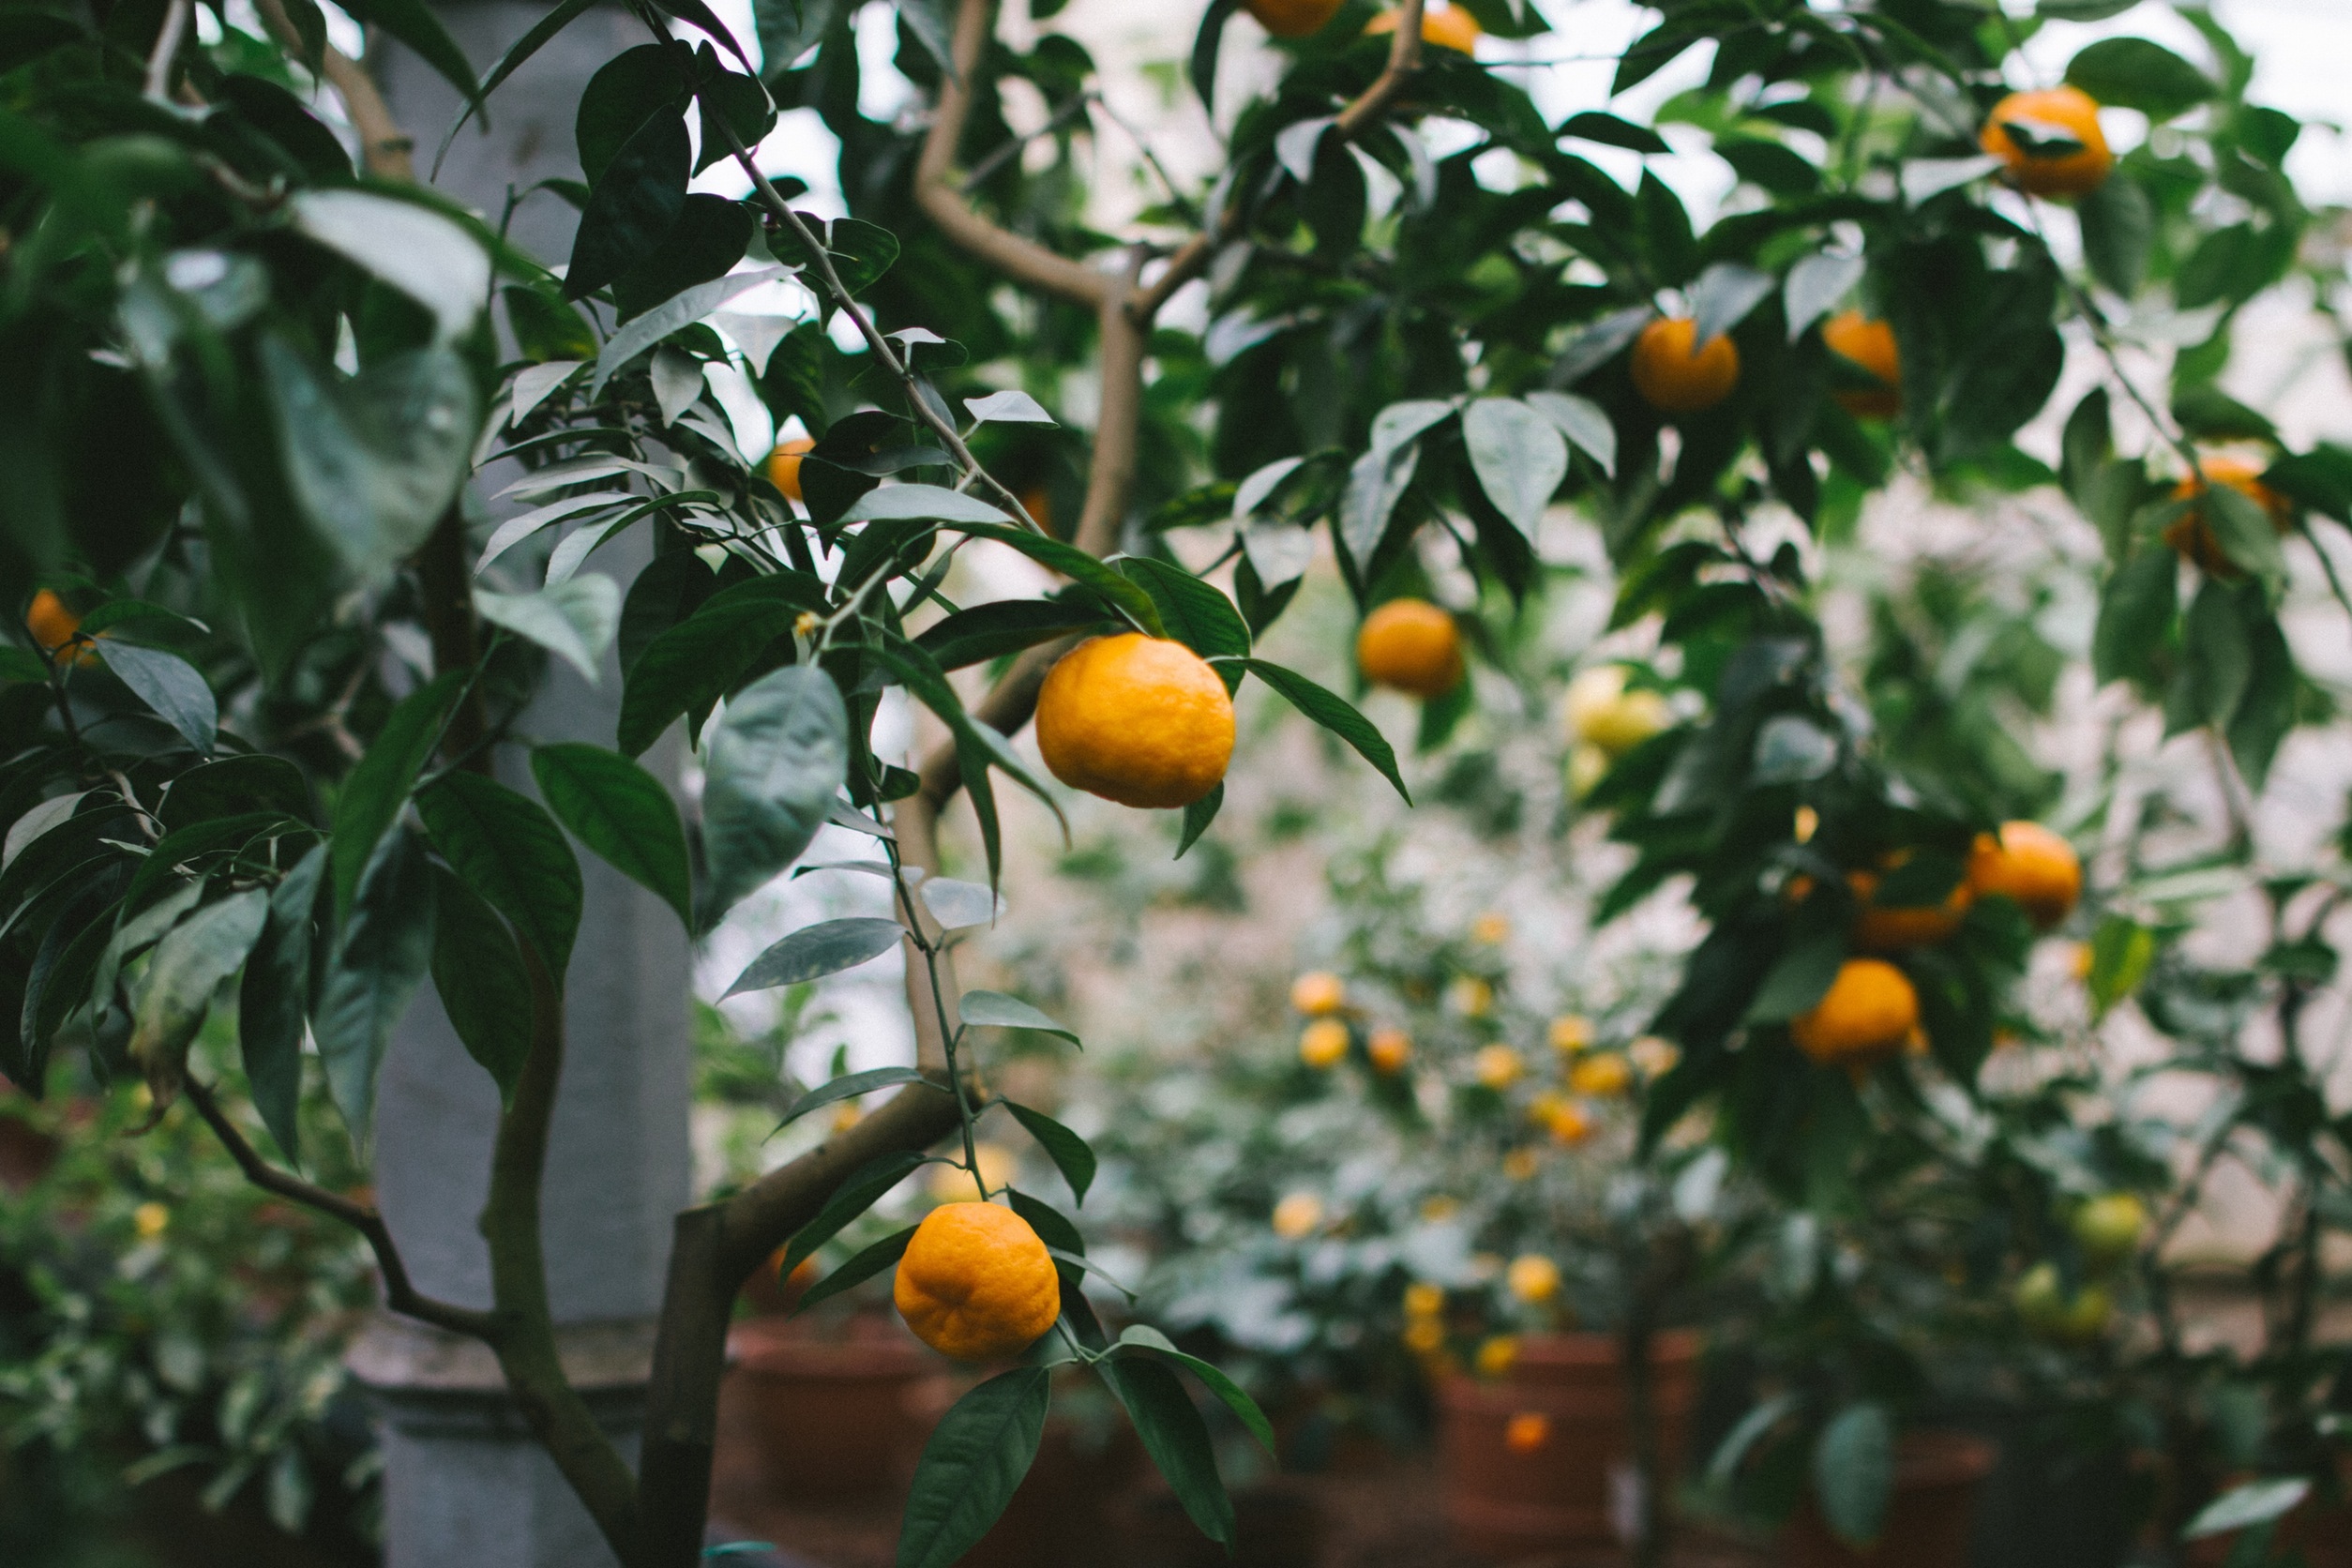 Wallpaper for mobile devices tree, food, branches, oranges